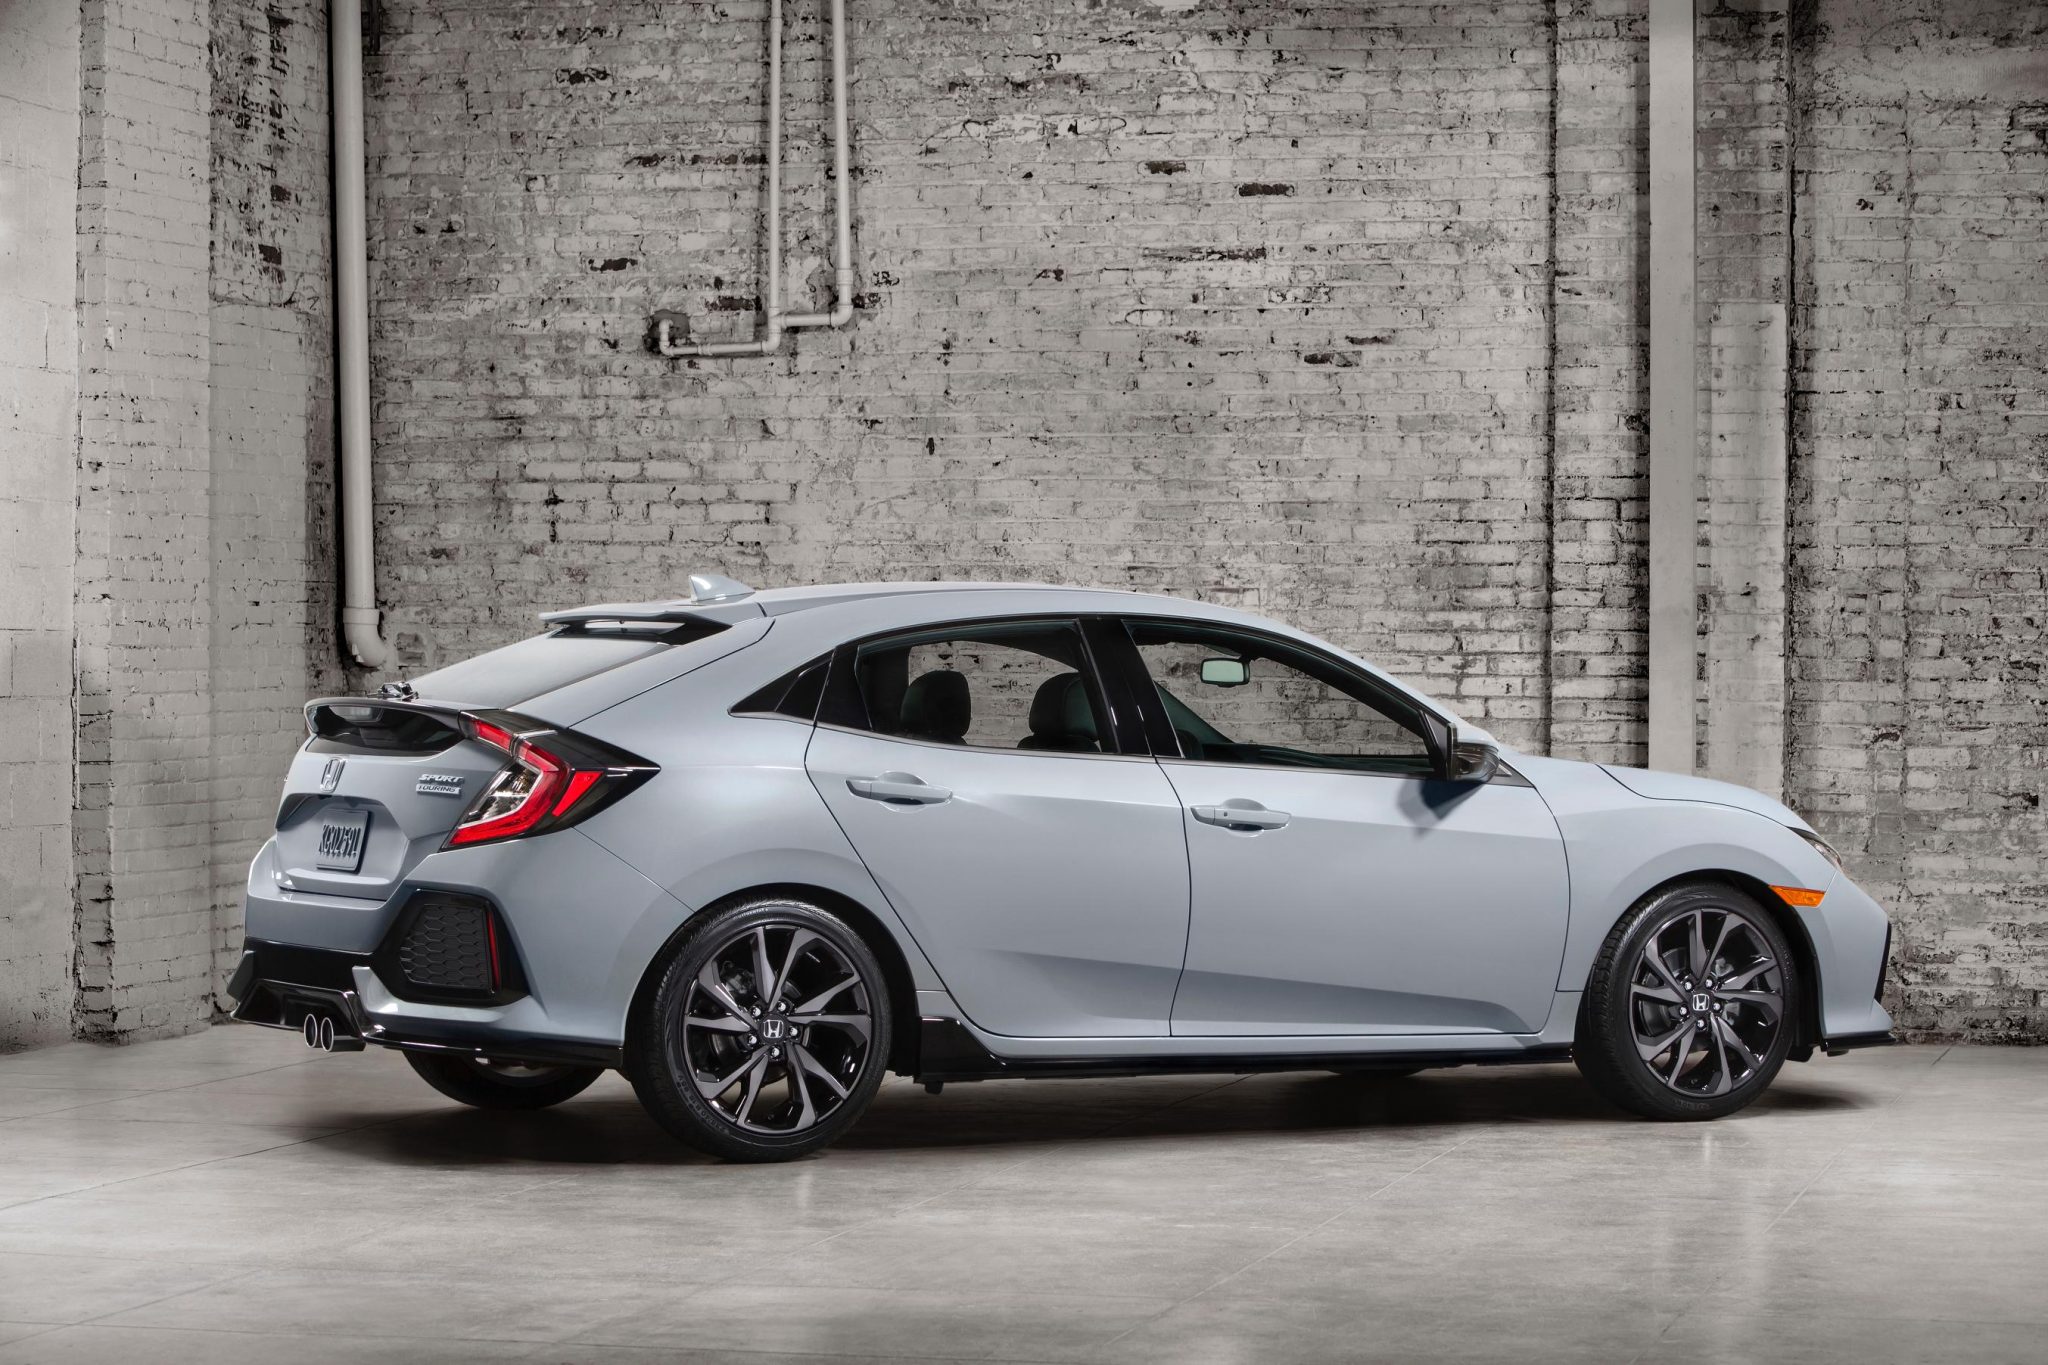 The 2017 Honda Civic Hatchback Arrives This Fall